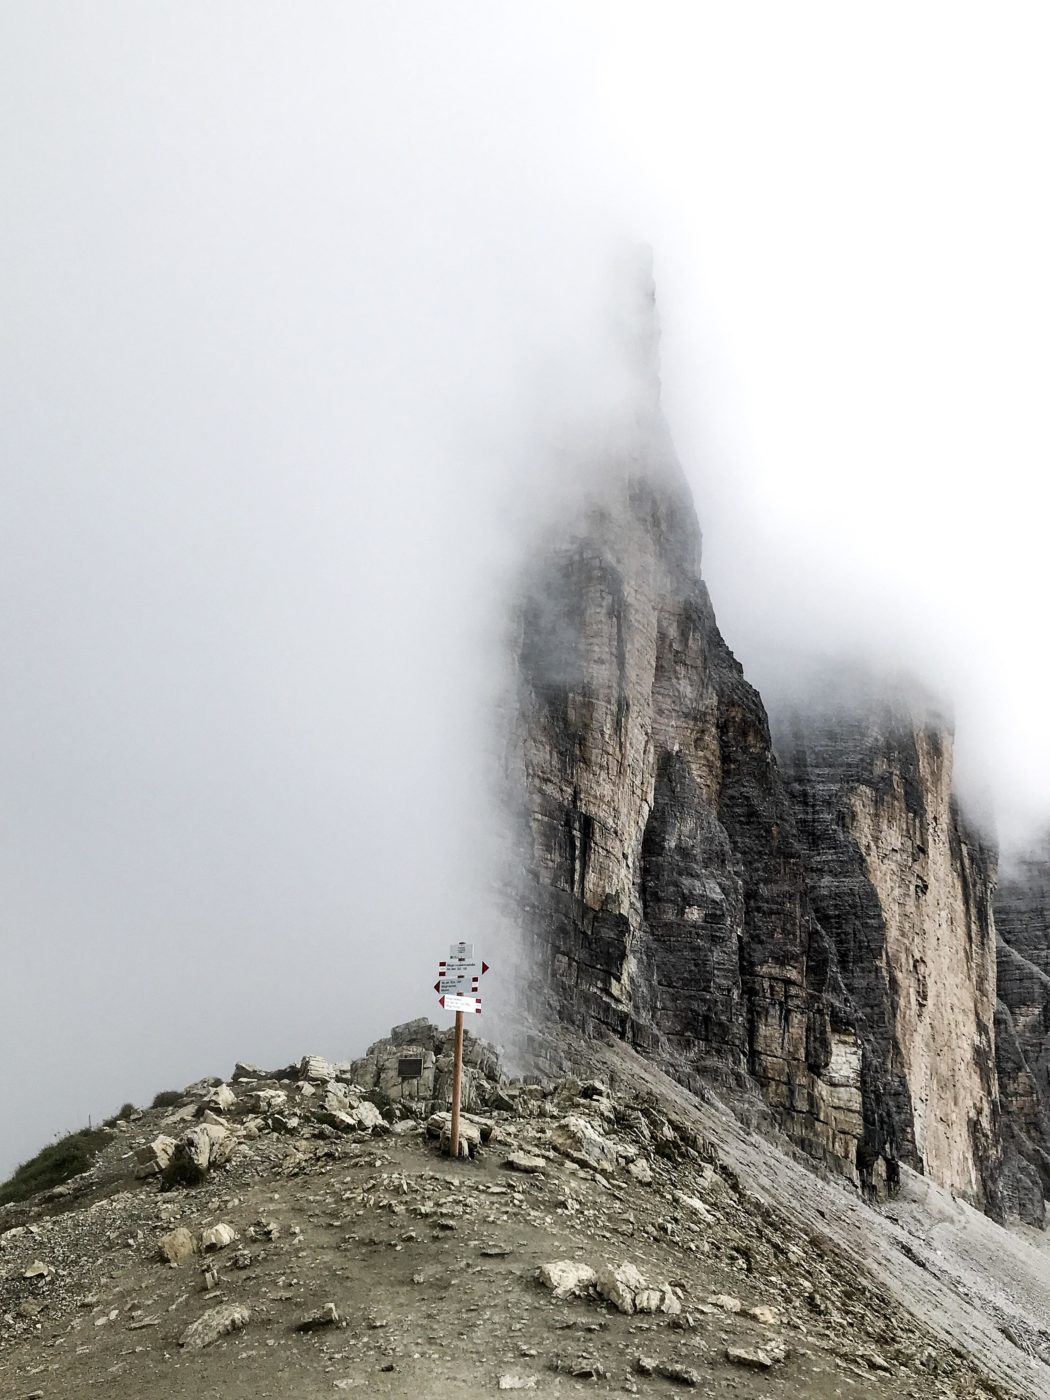 On the way to Tre Cime, Drei Zinnen in the Dolomites